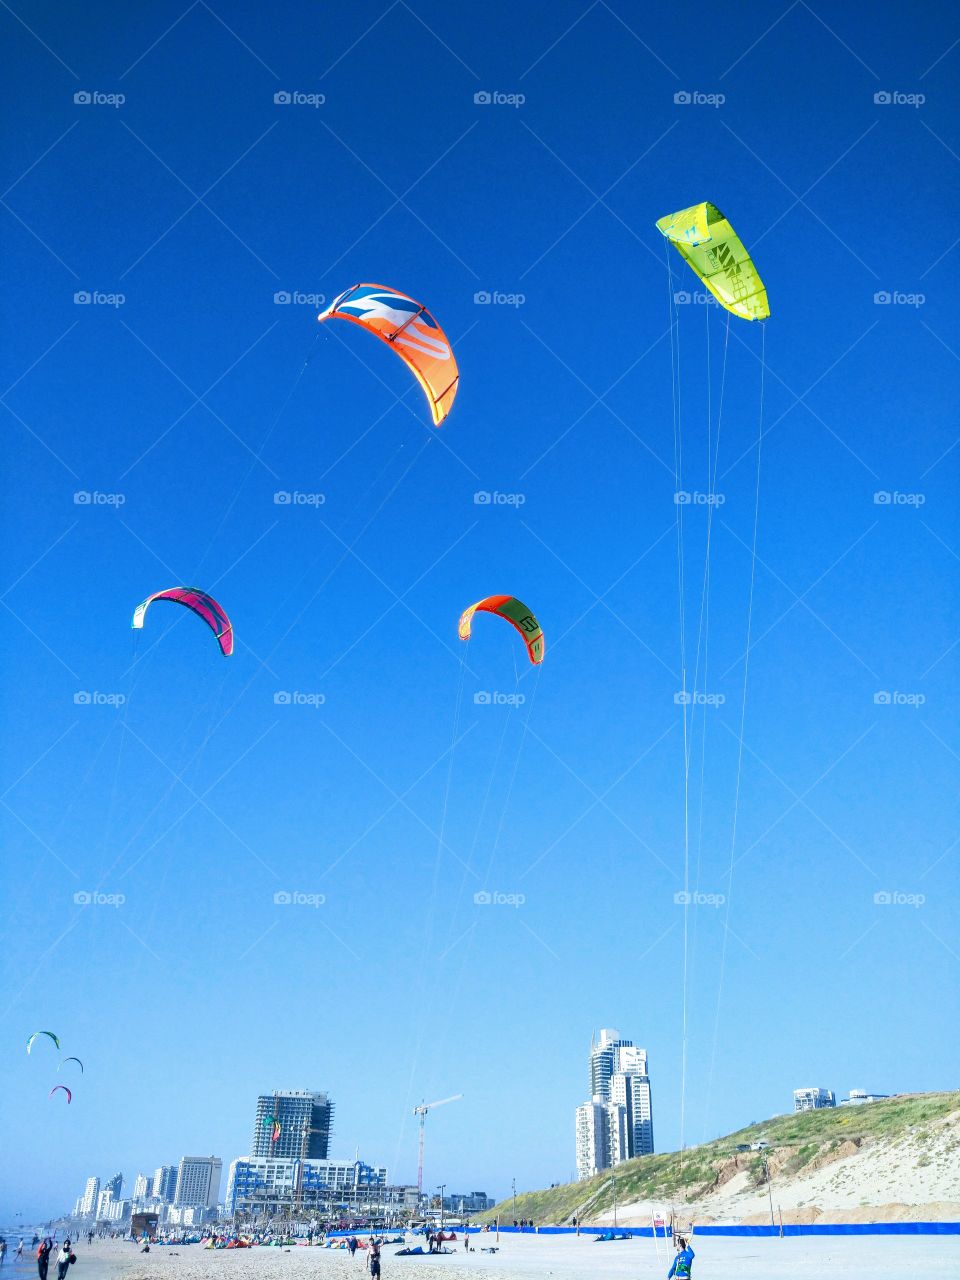 Kiteboarding is an action sport .
The power of the wind. Sea.